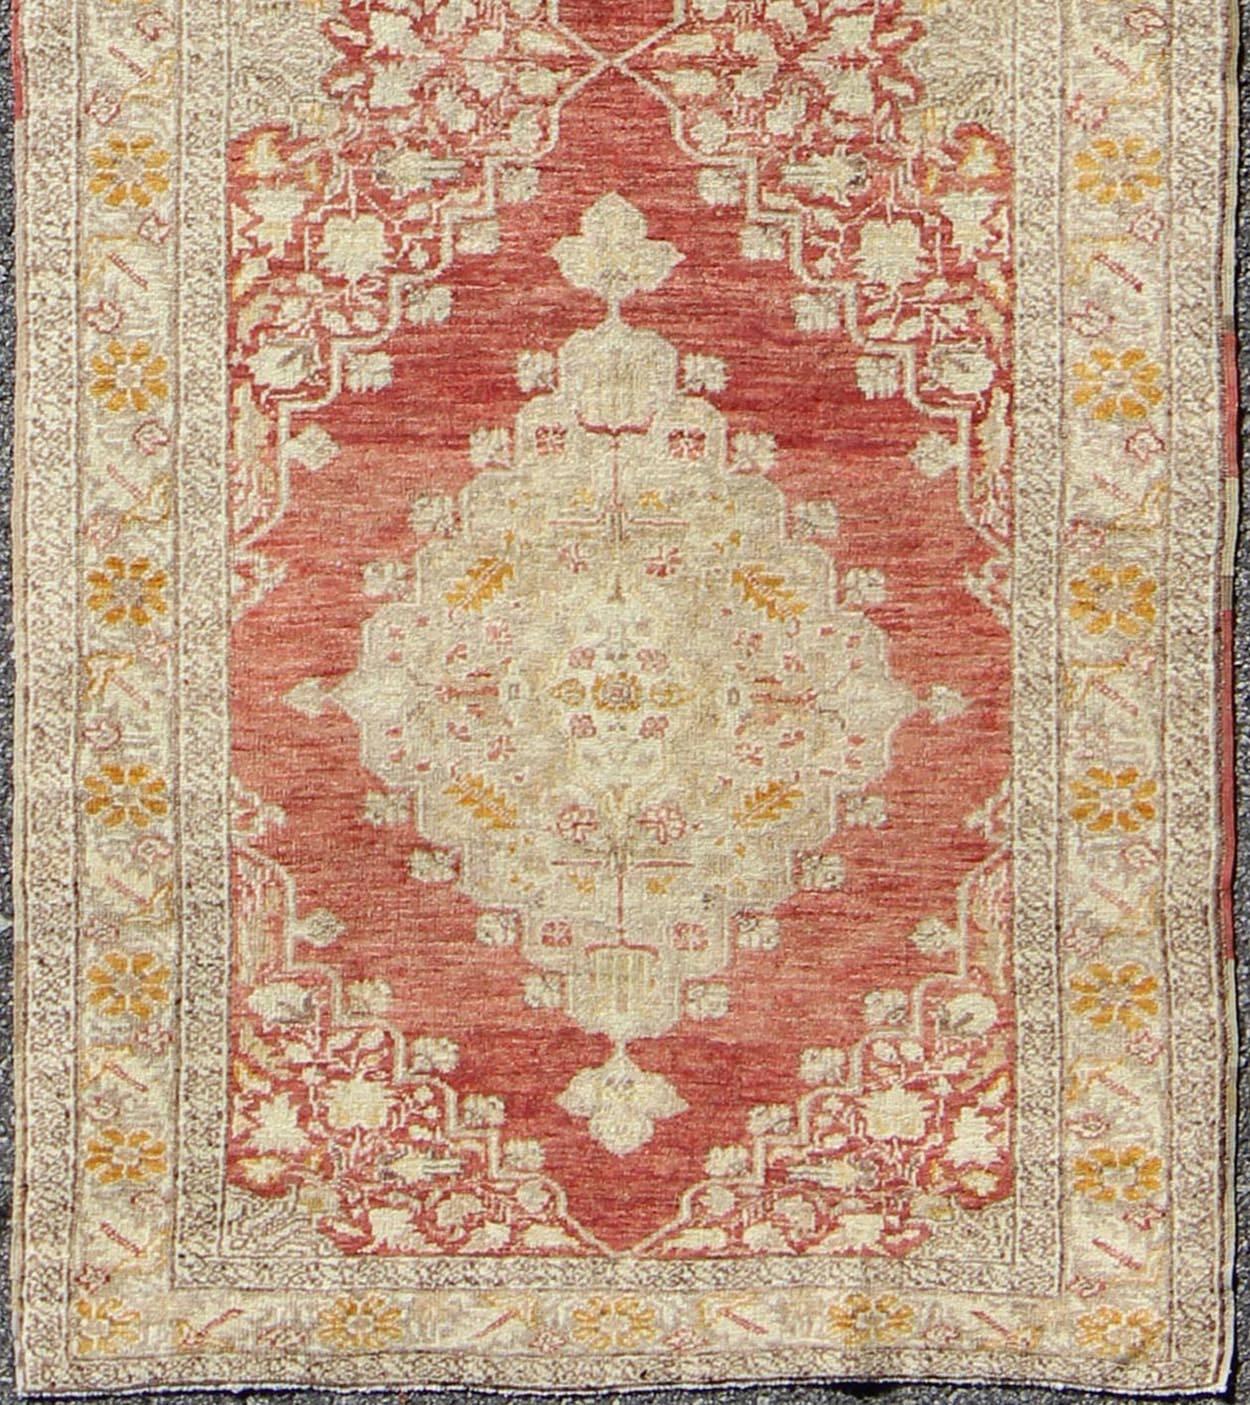 Antique Turkish Oushak runner with red background and ivory/cream medallions, rug en-112041, country of origin / type: Turkey / Oushak, circa 1920

This antique Turkish Oushak gallery runner (circa early 20th century) features a unique blend of